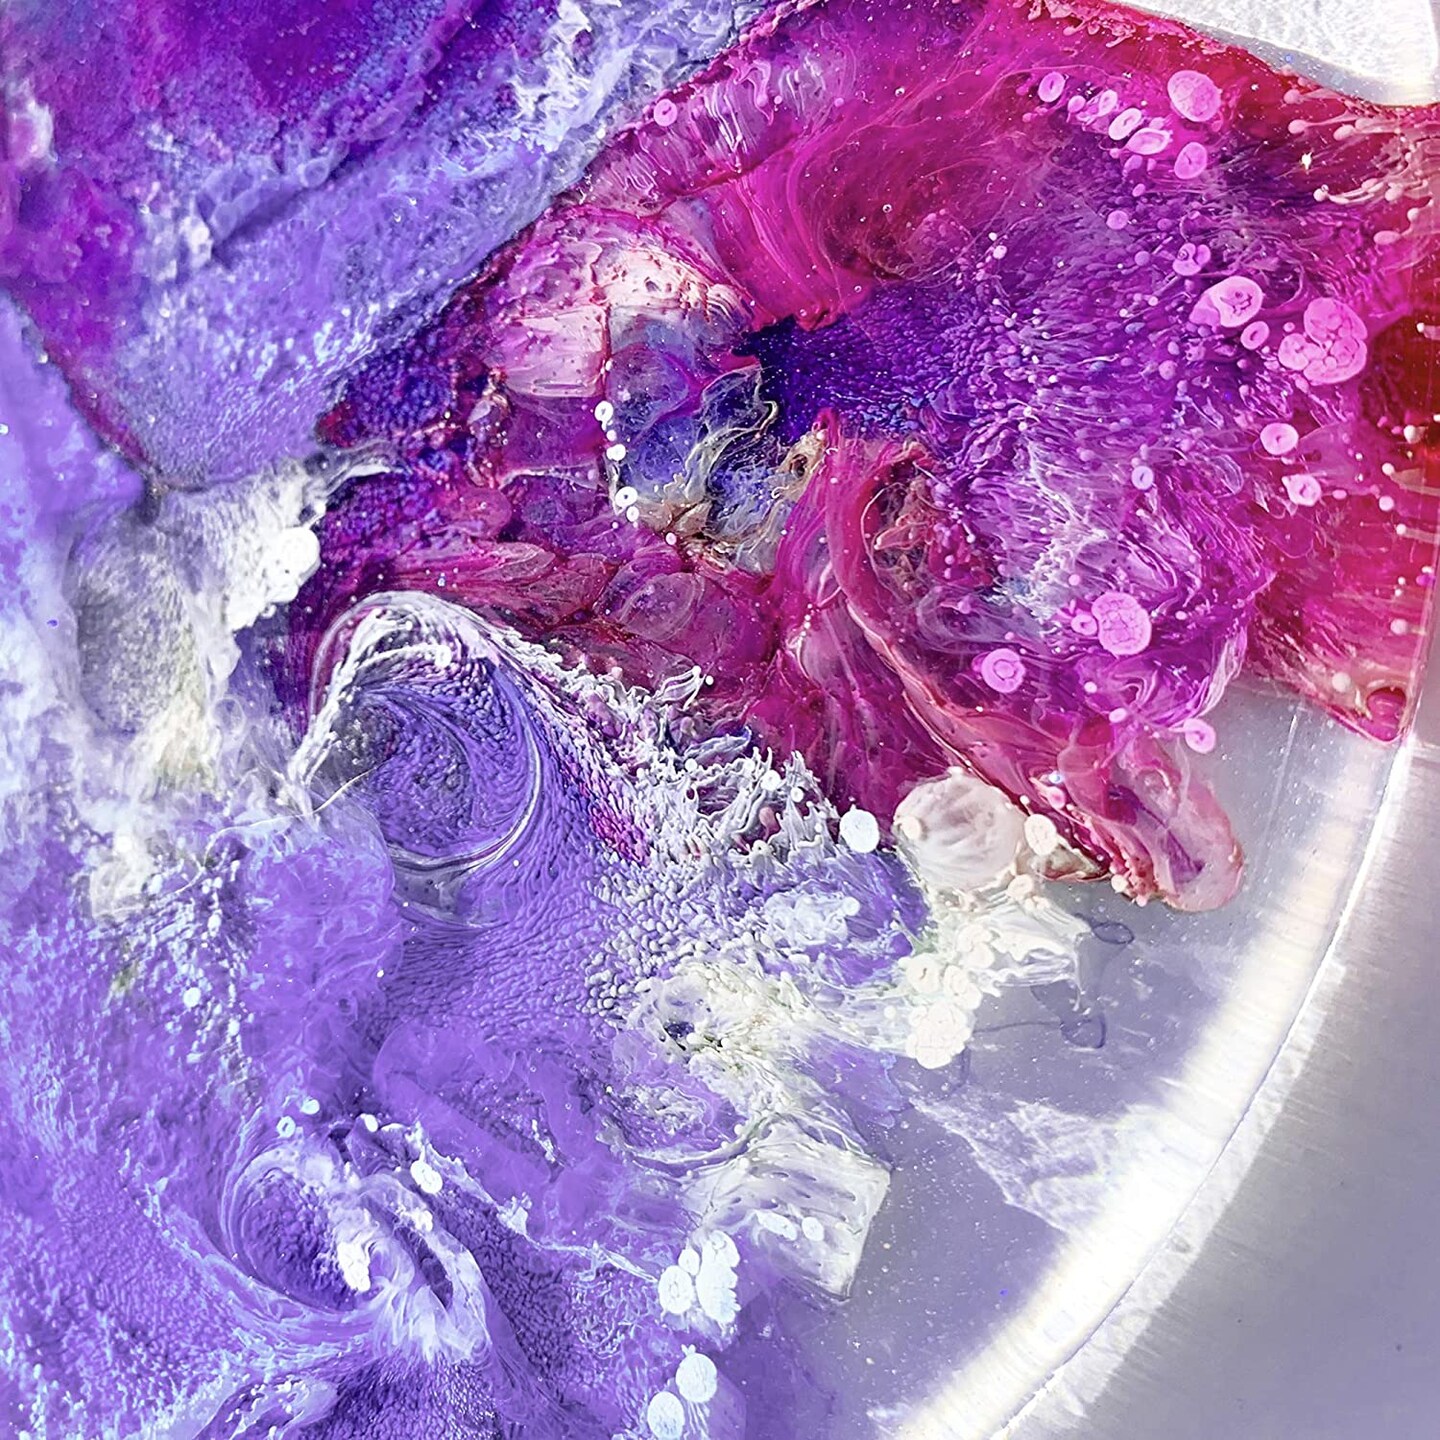 Pixiss Purples Alcohol Inks Set, 5 Highly Saturated Purple Alcohol Inks for  Resin